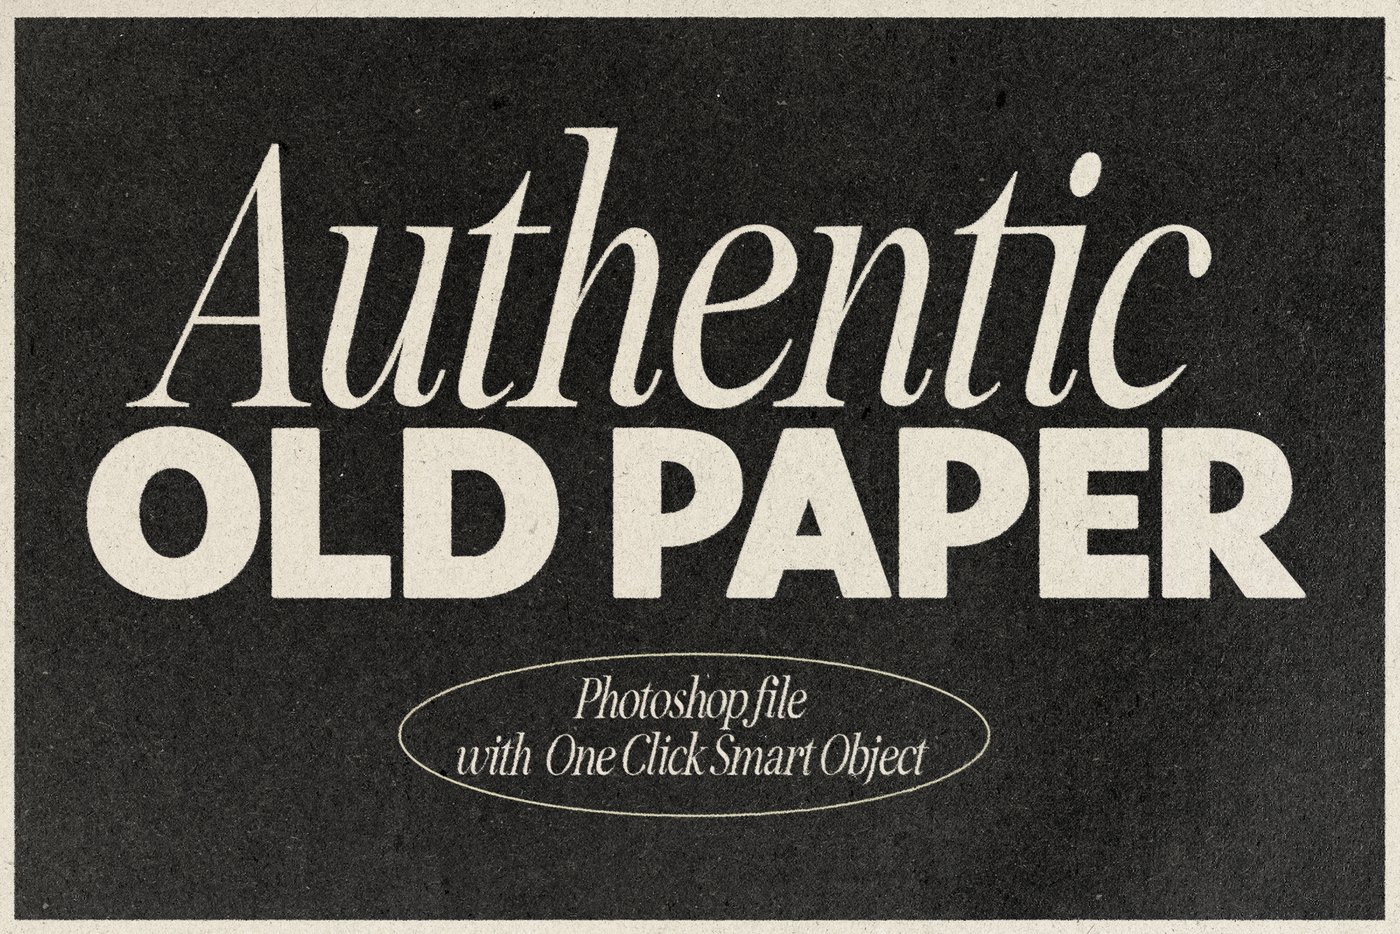 Authentic Old Paper Effect - Photoshop Template main product image by Nicky Laatz